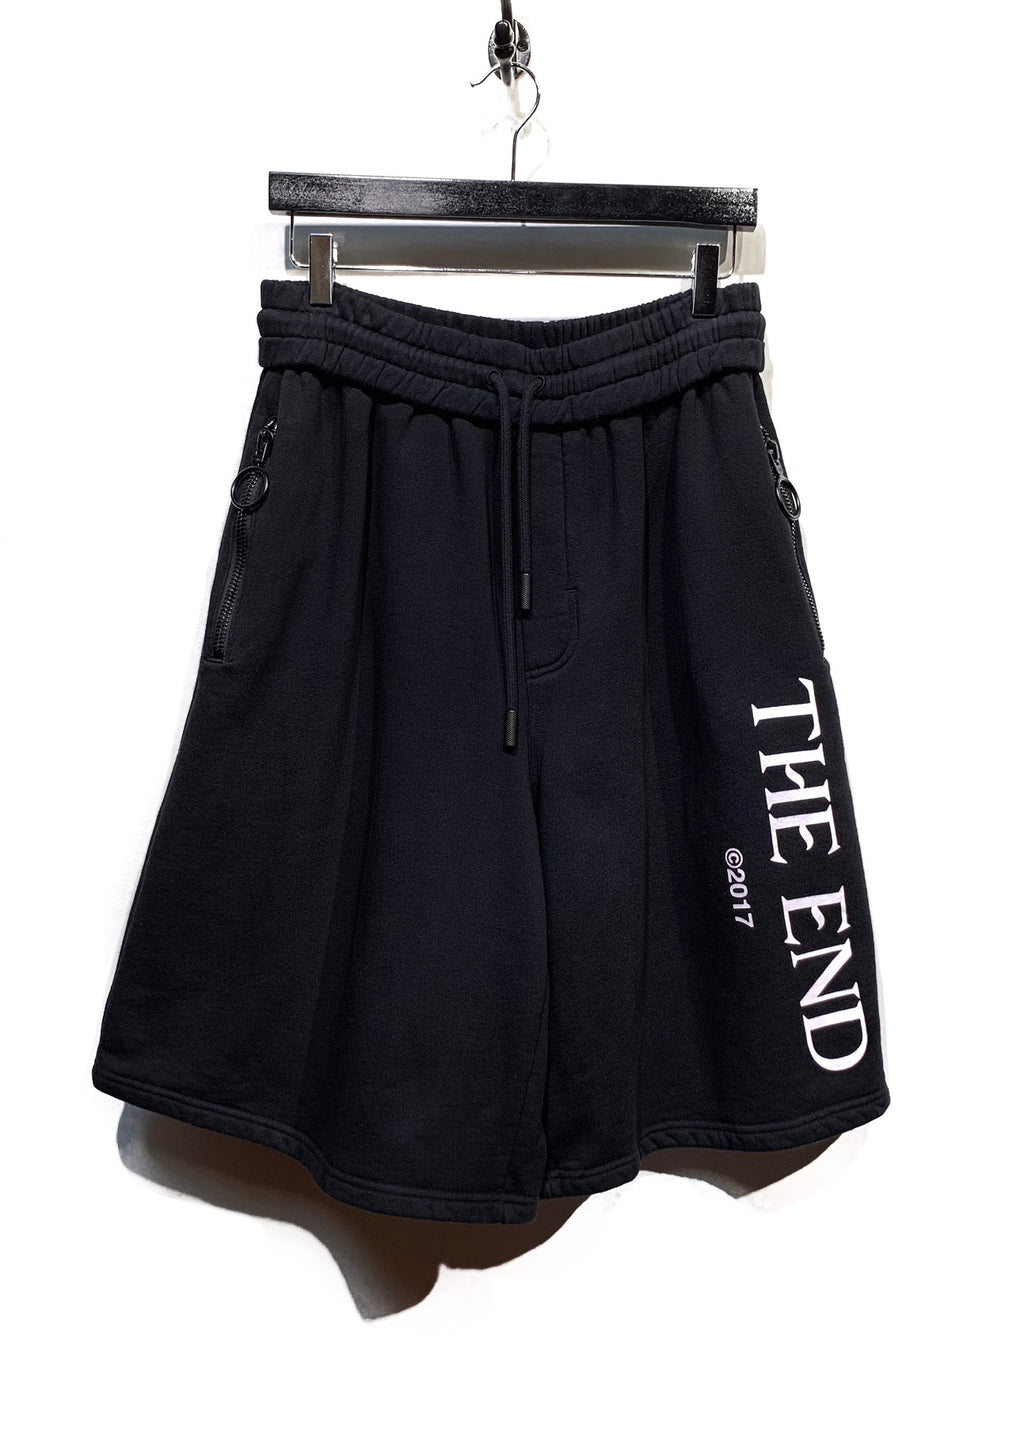 Off-White Baggy "The End" Printed Sweatshorts